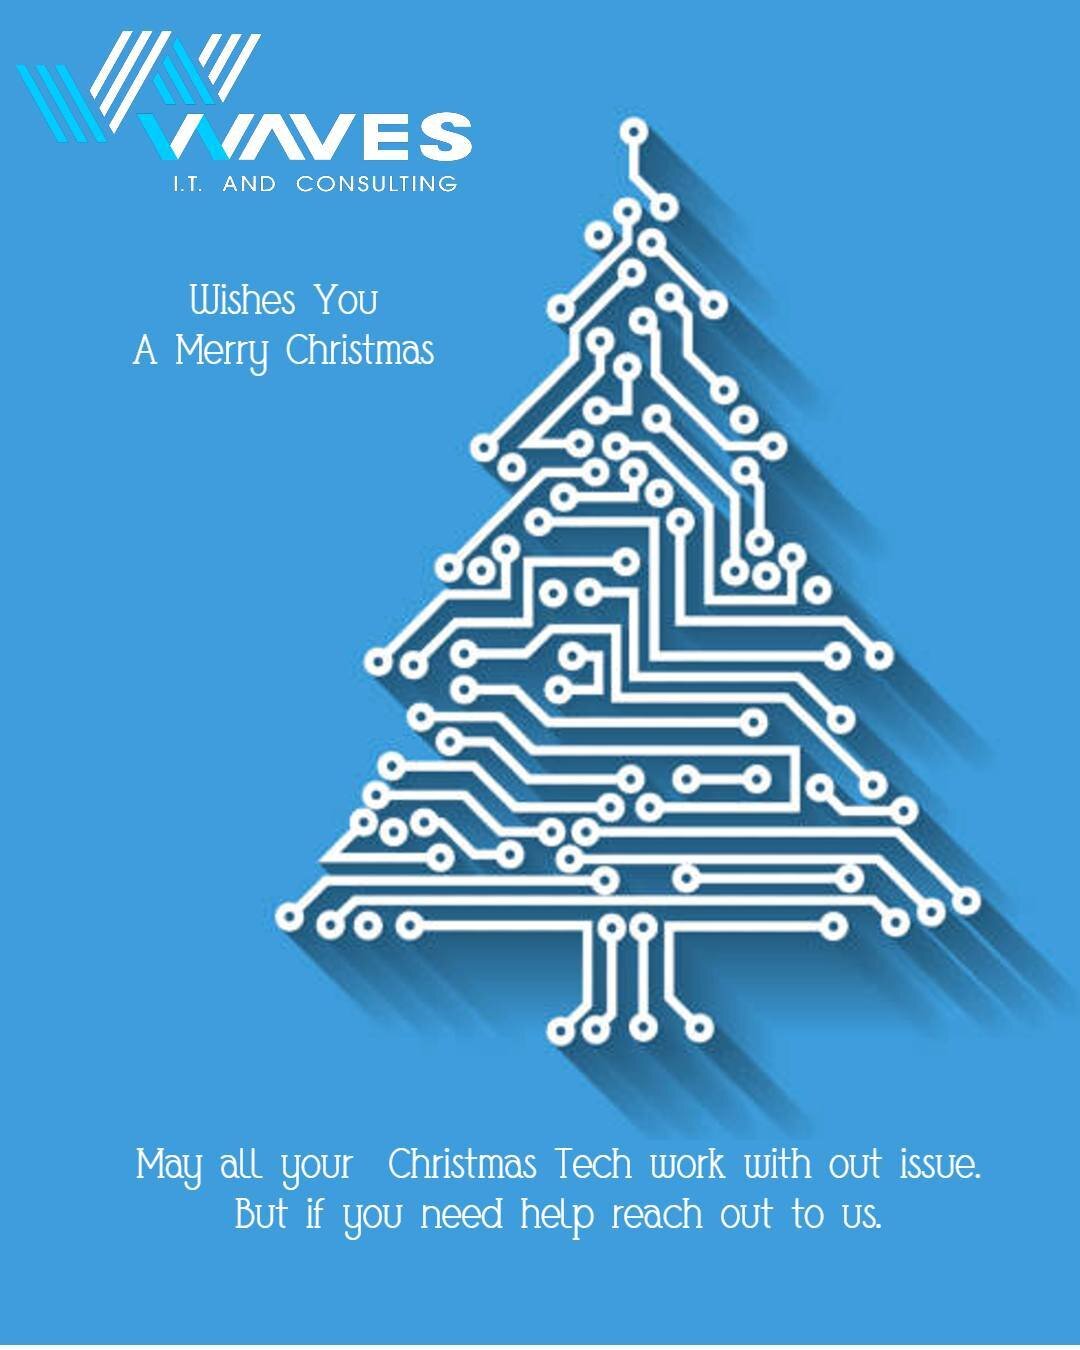 Merry Christmas from the us to you and your family. And if your Christmas Tech give you any issues. Reach out to us via social media or our website.